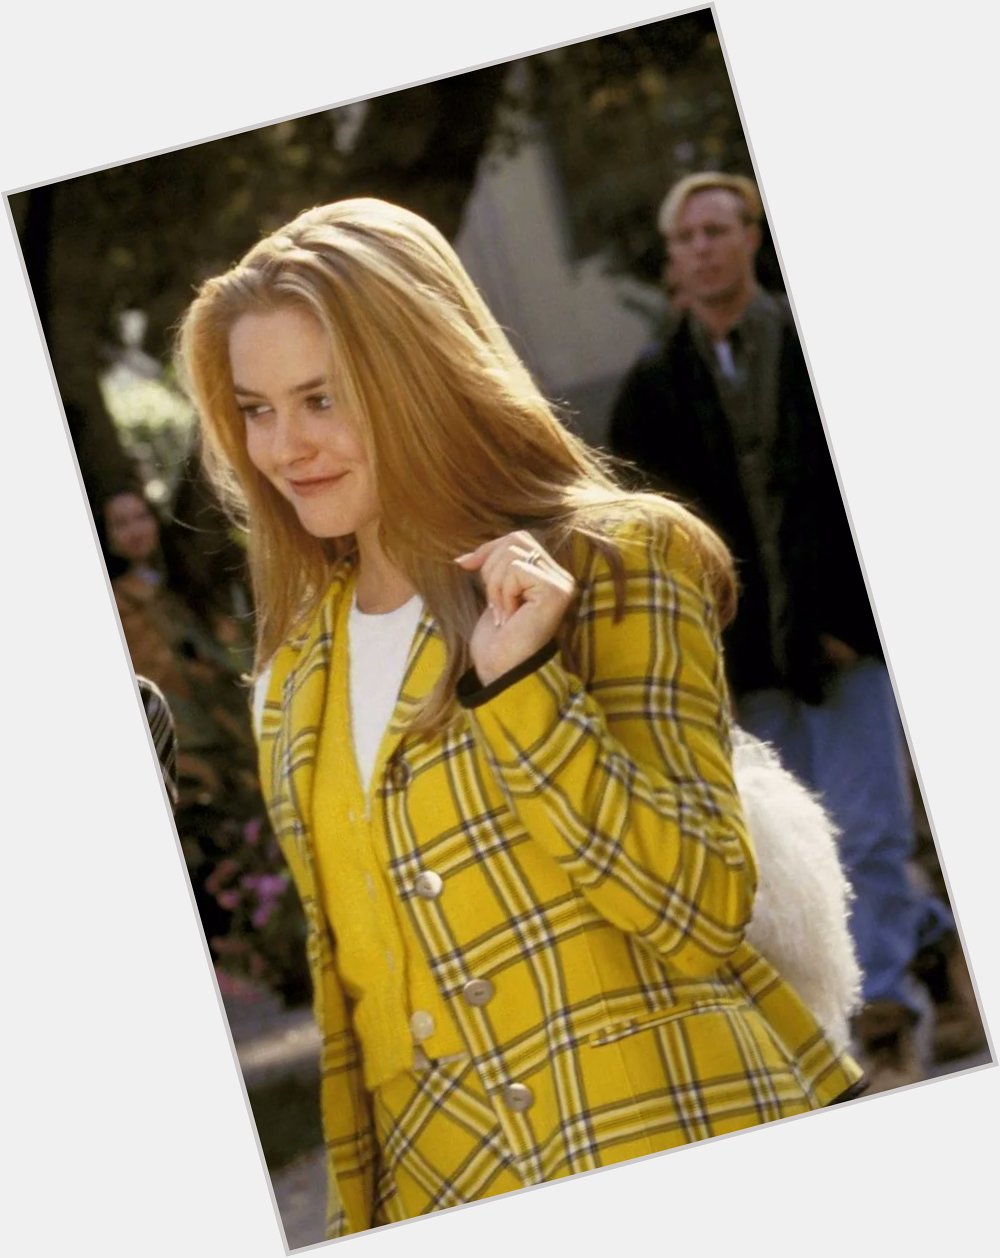 Happy birthday to Alicia Silverstone, who turns 46 today! 